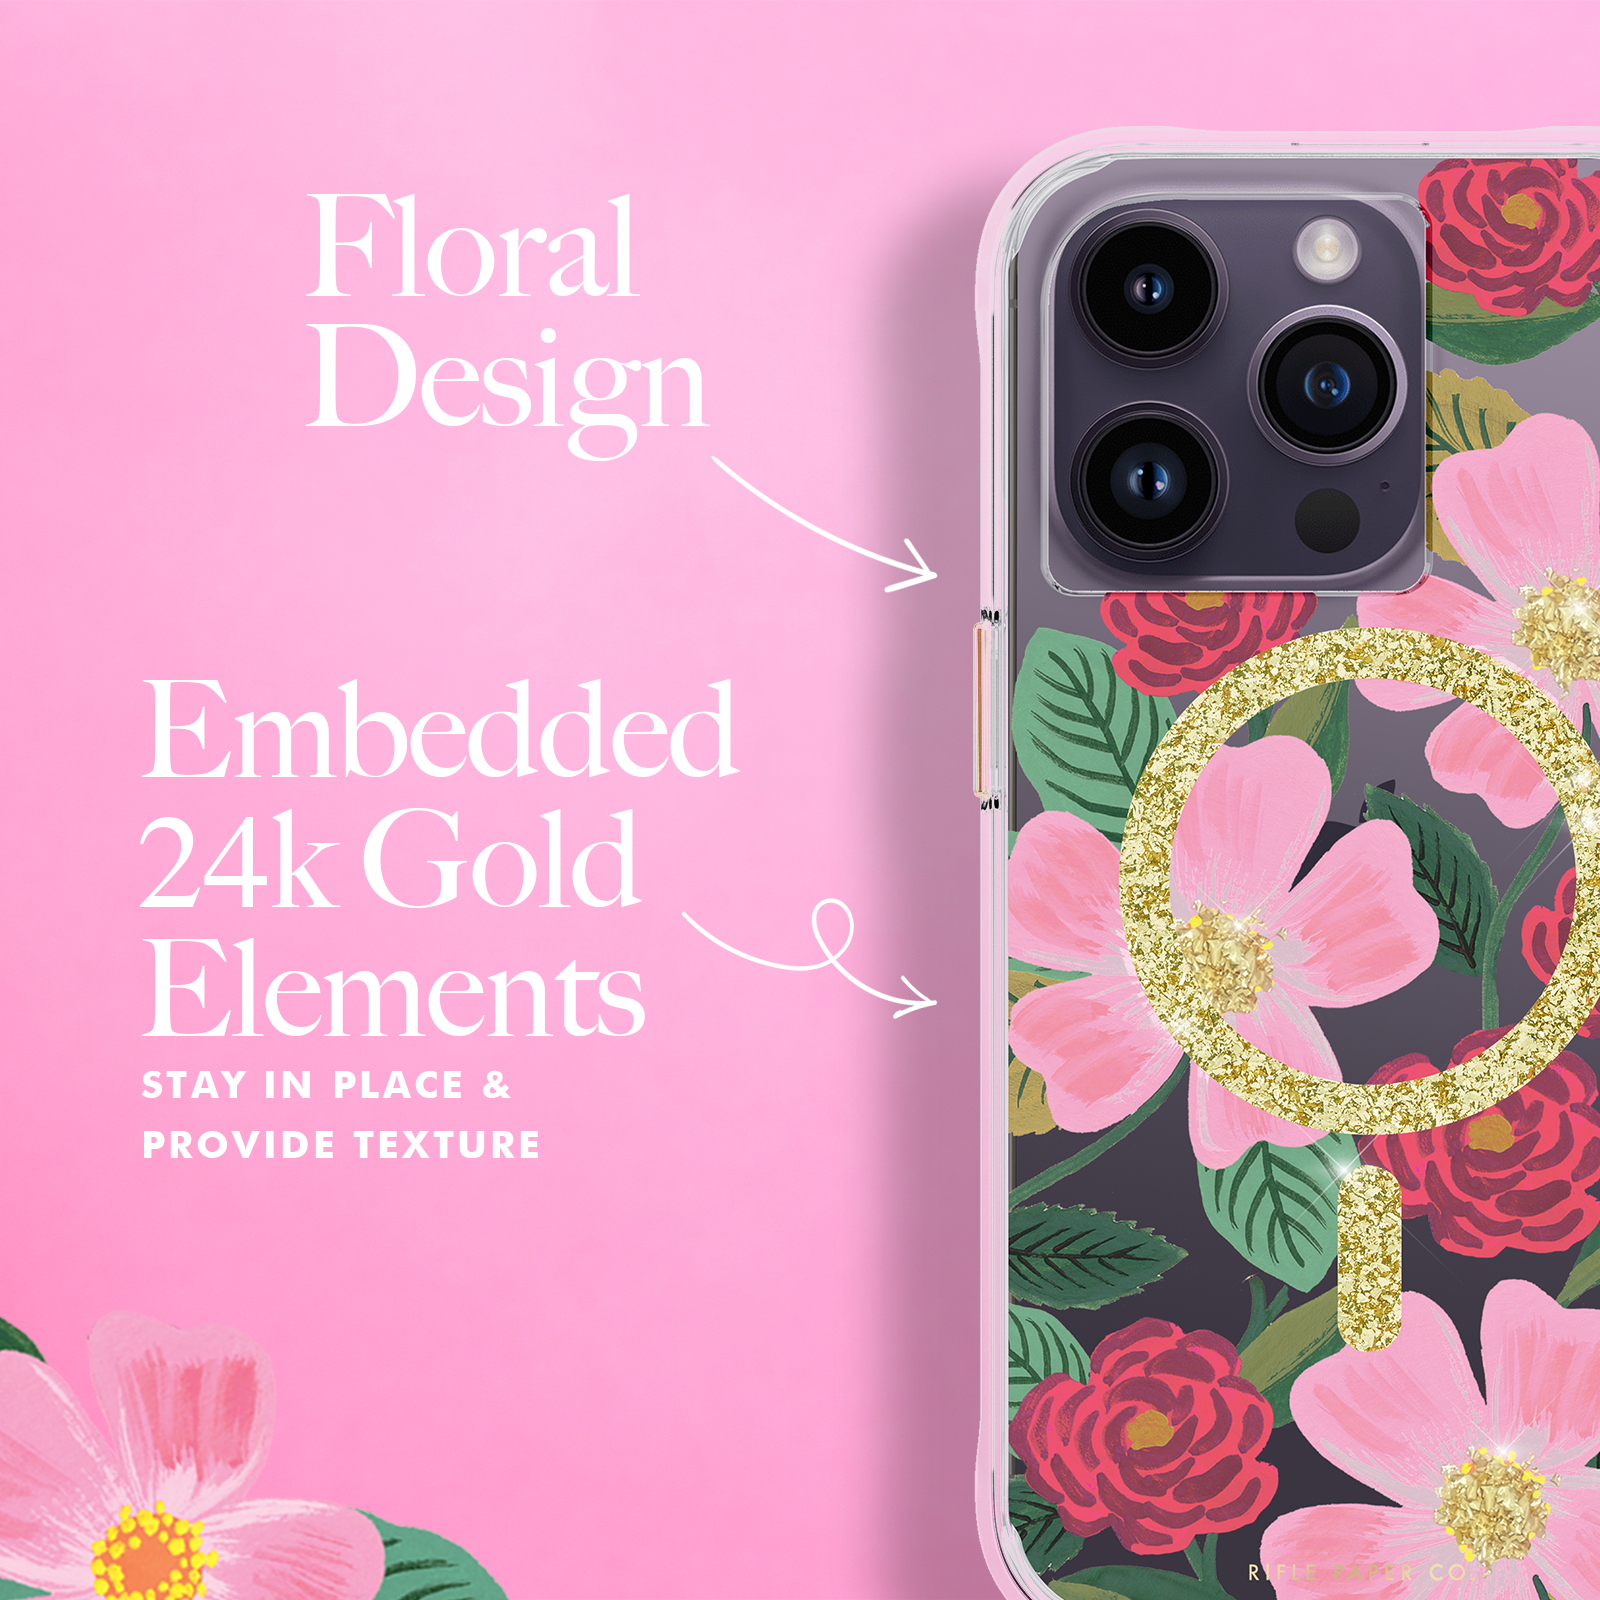 Rifle Paper Co. Rose Garden (Works with MagSafe)